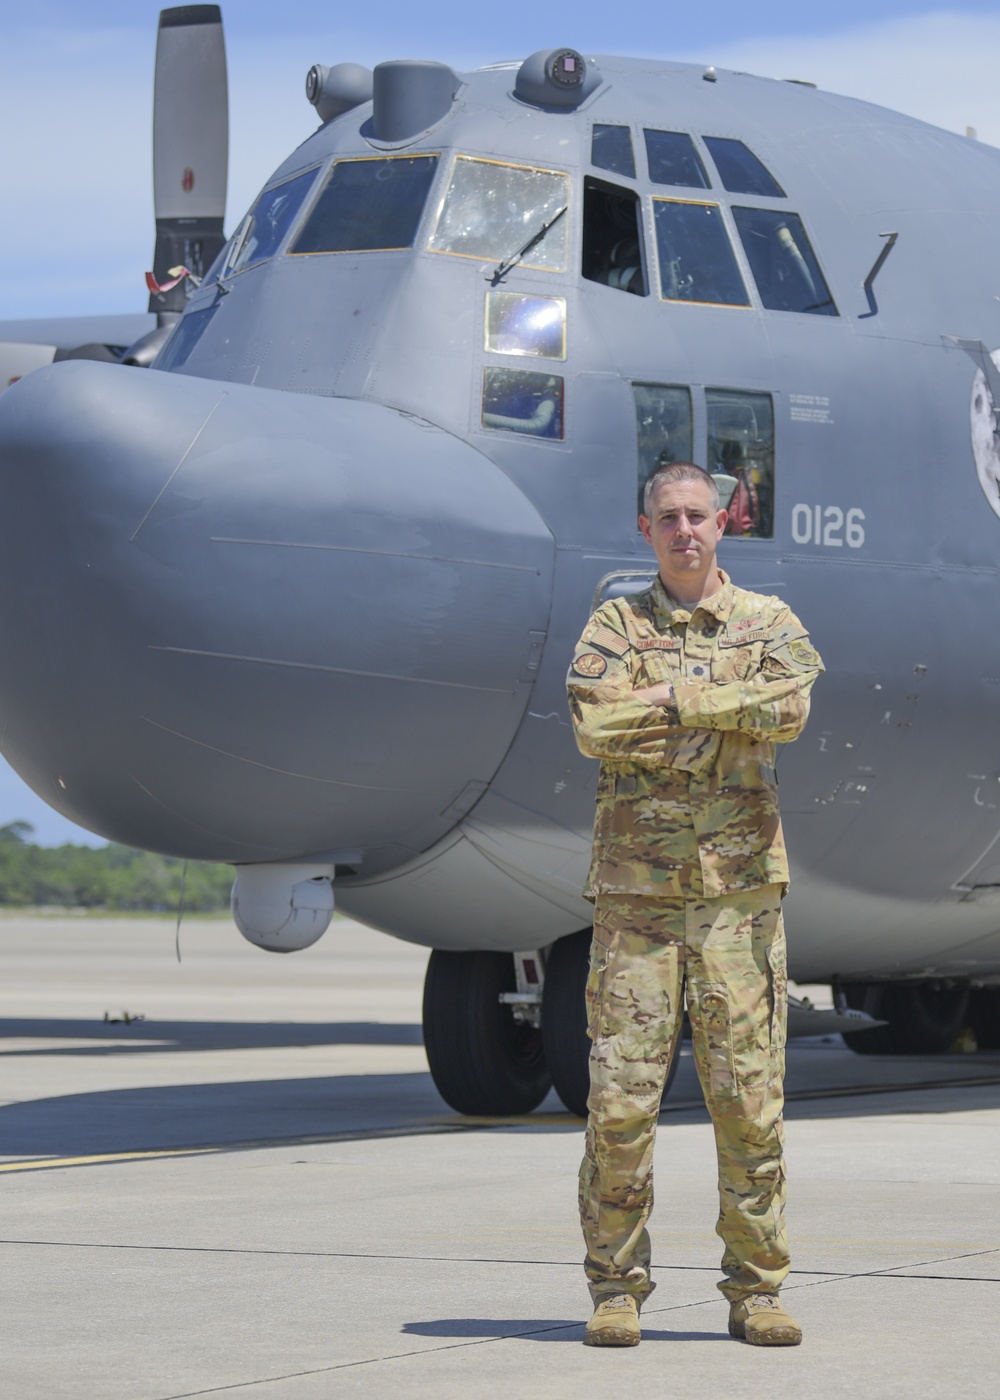 Lt. Col. Compton takes command of the 15th Special Operations Squadron